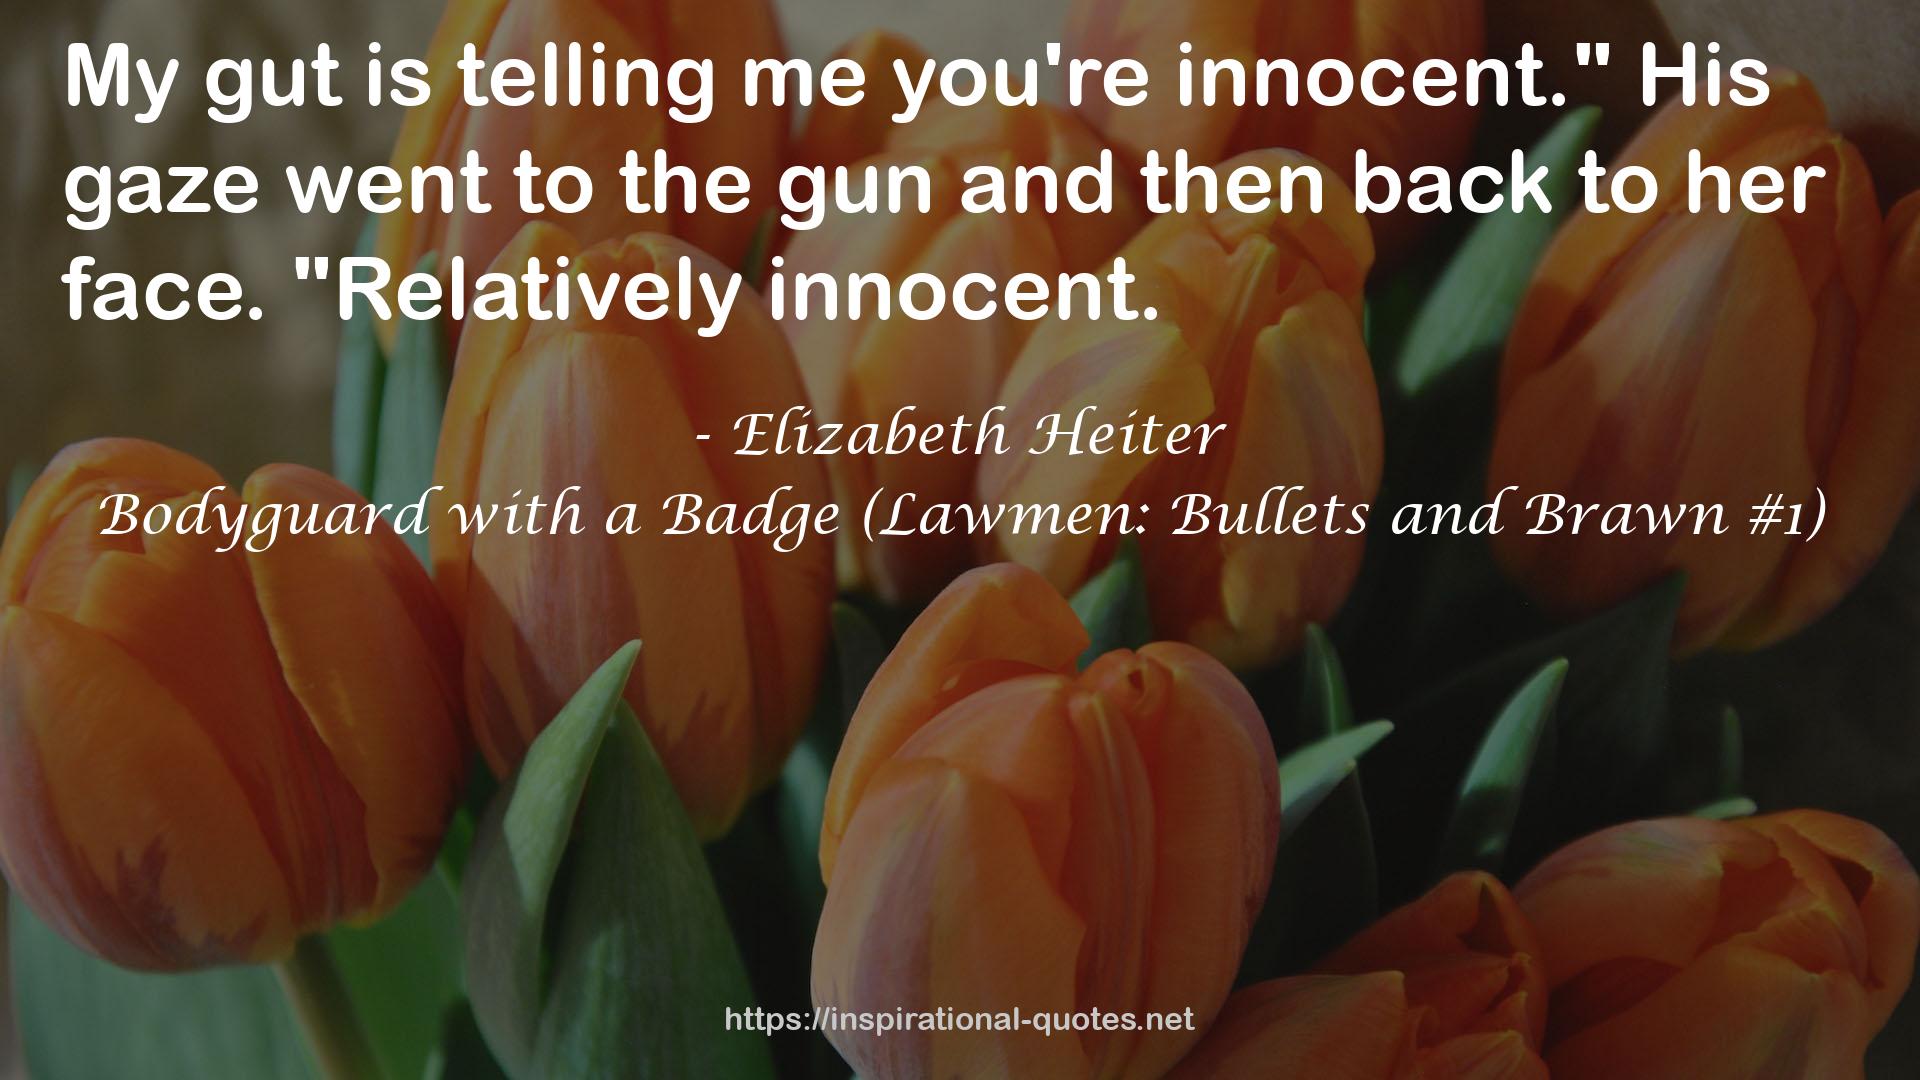 Bodyguard with a Badge (Lawmen: Bullets and Brawn #1) QUOTES